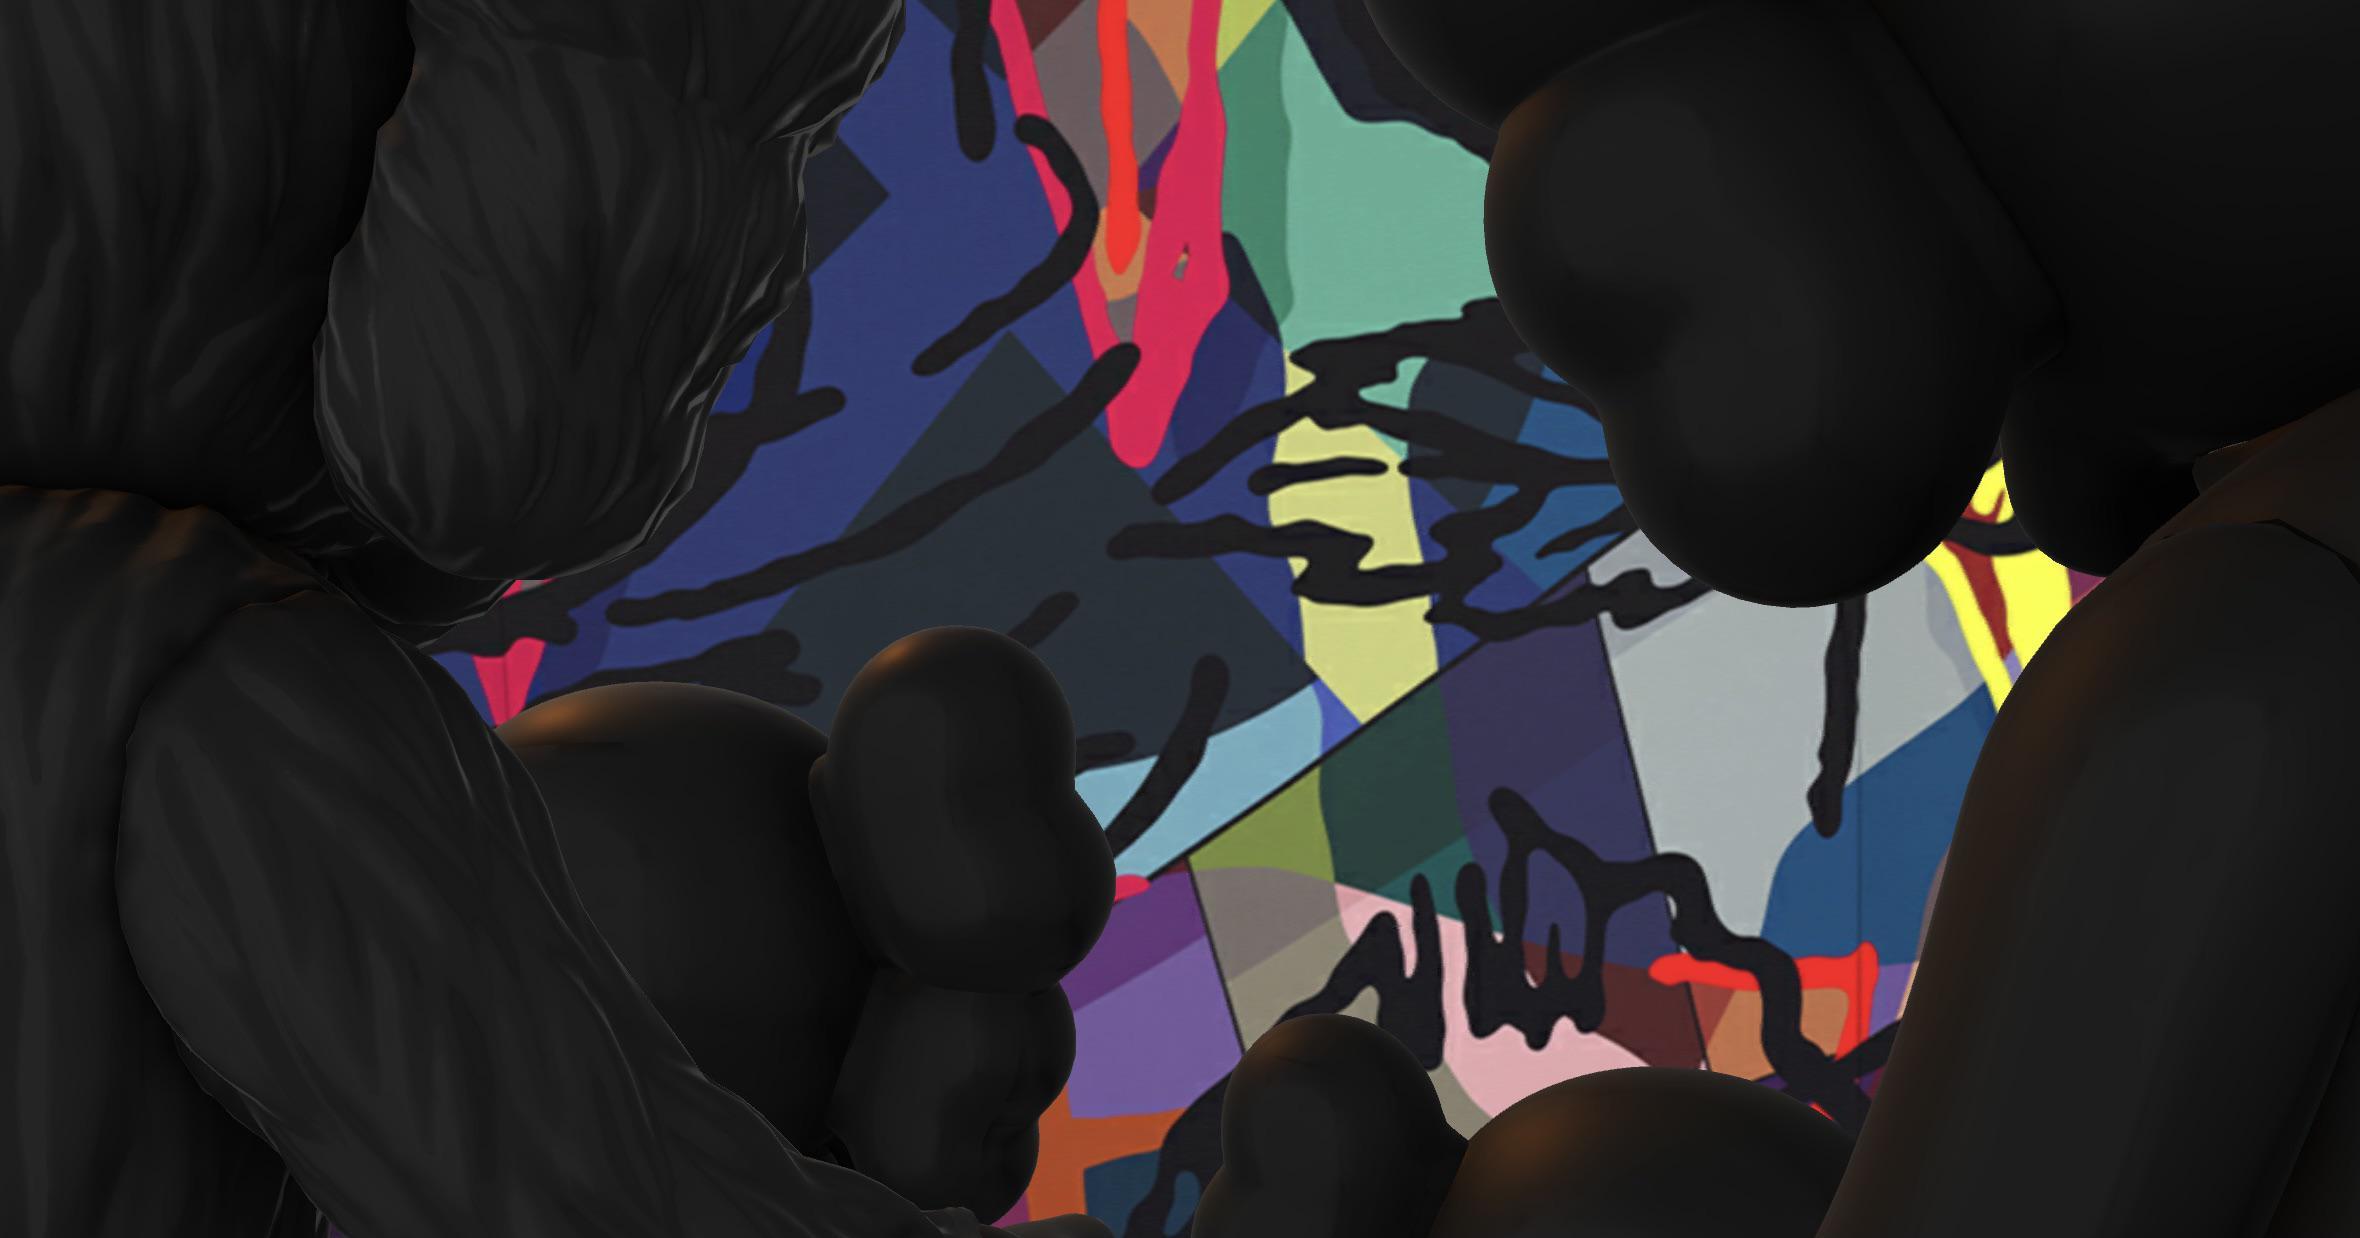 Here S Some Cool Photos I Took With Acute Art R Kaws